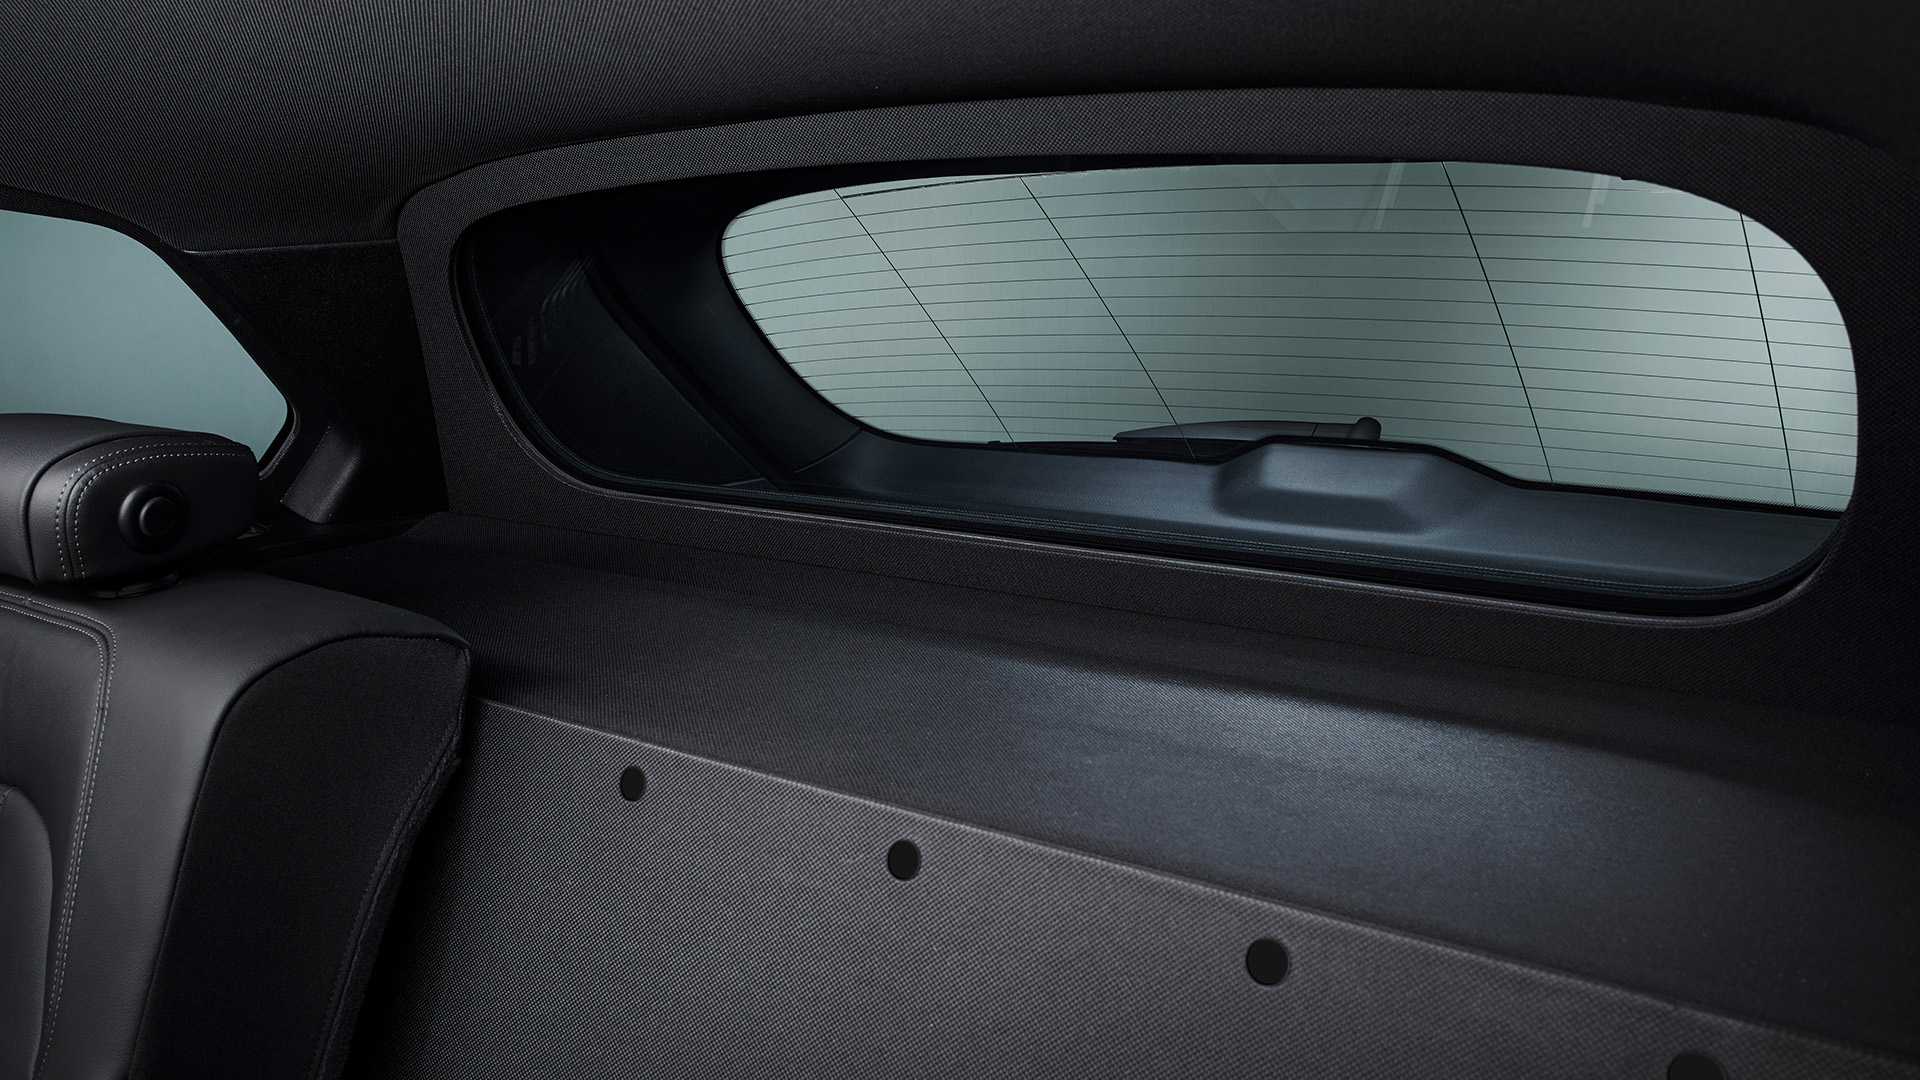 2020 BMW X5 Protection VR6 (Armored Vehicle) Interior Detail Wallpapers #18 of 25